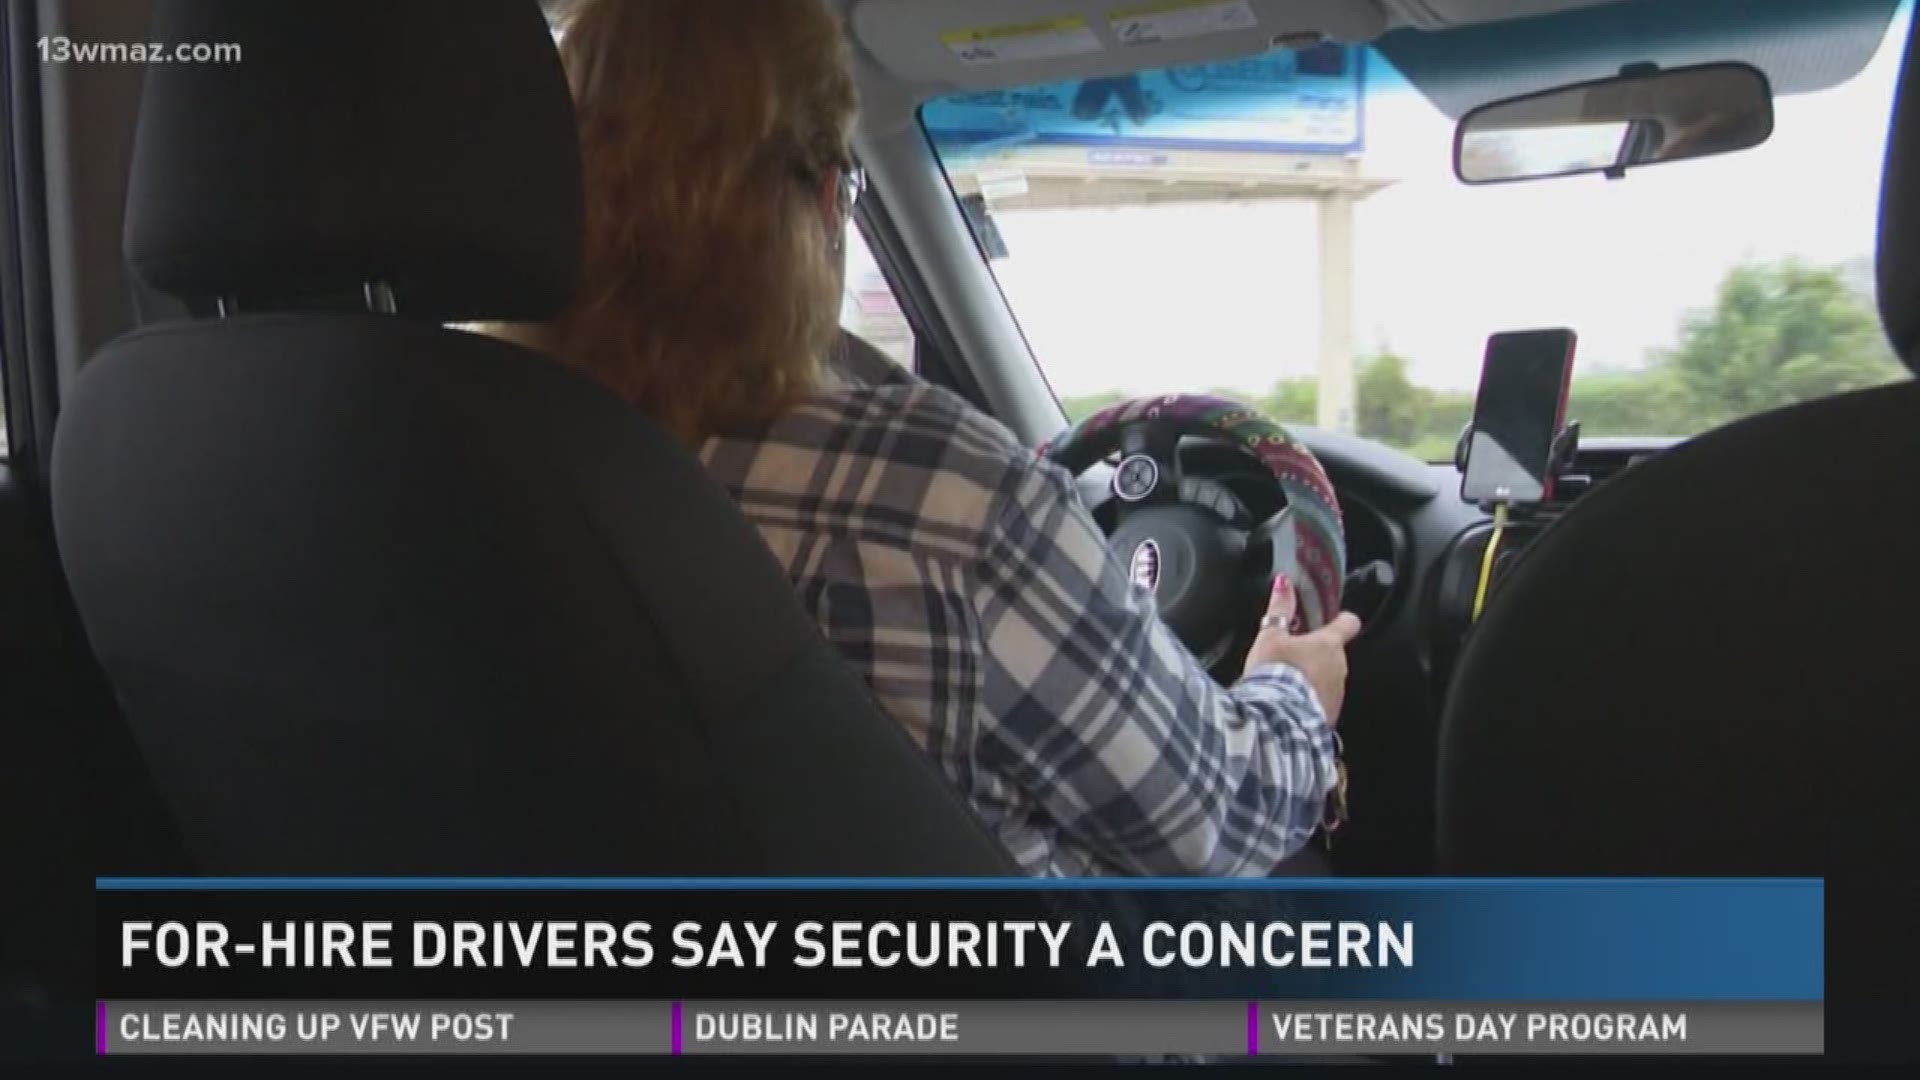 For-hire drivers say security a concern